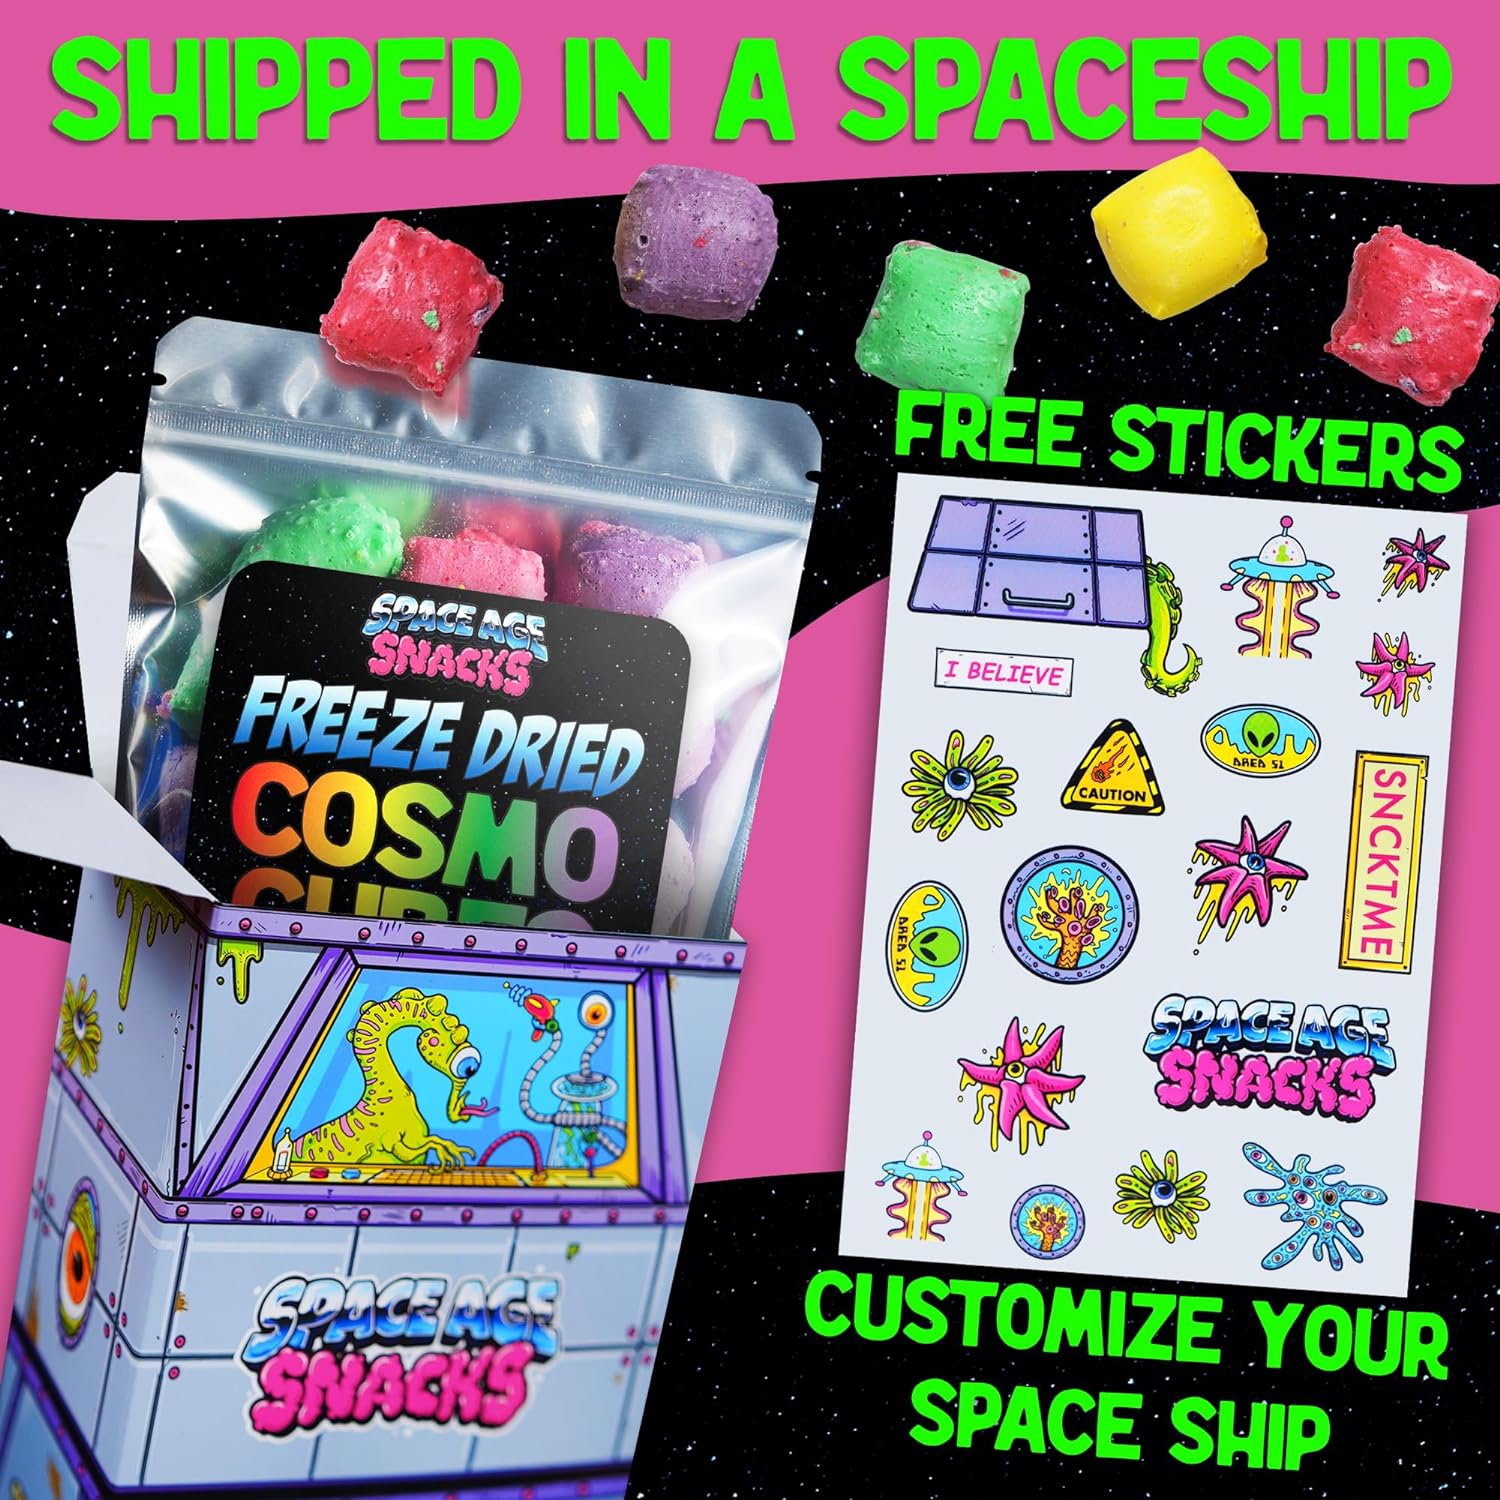 Freeze Dried Now and Later Cosmo Cubes Candy